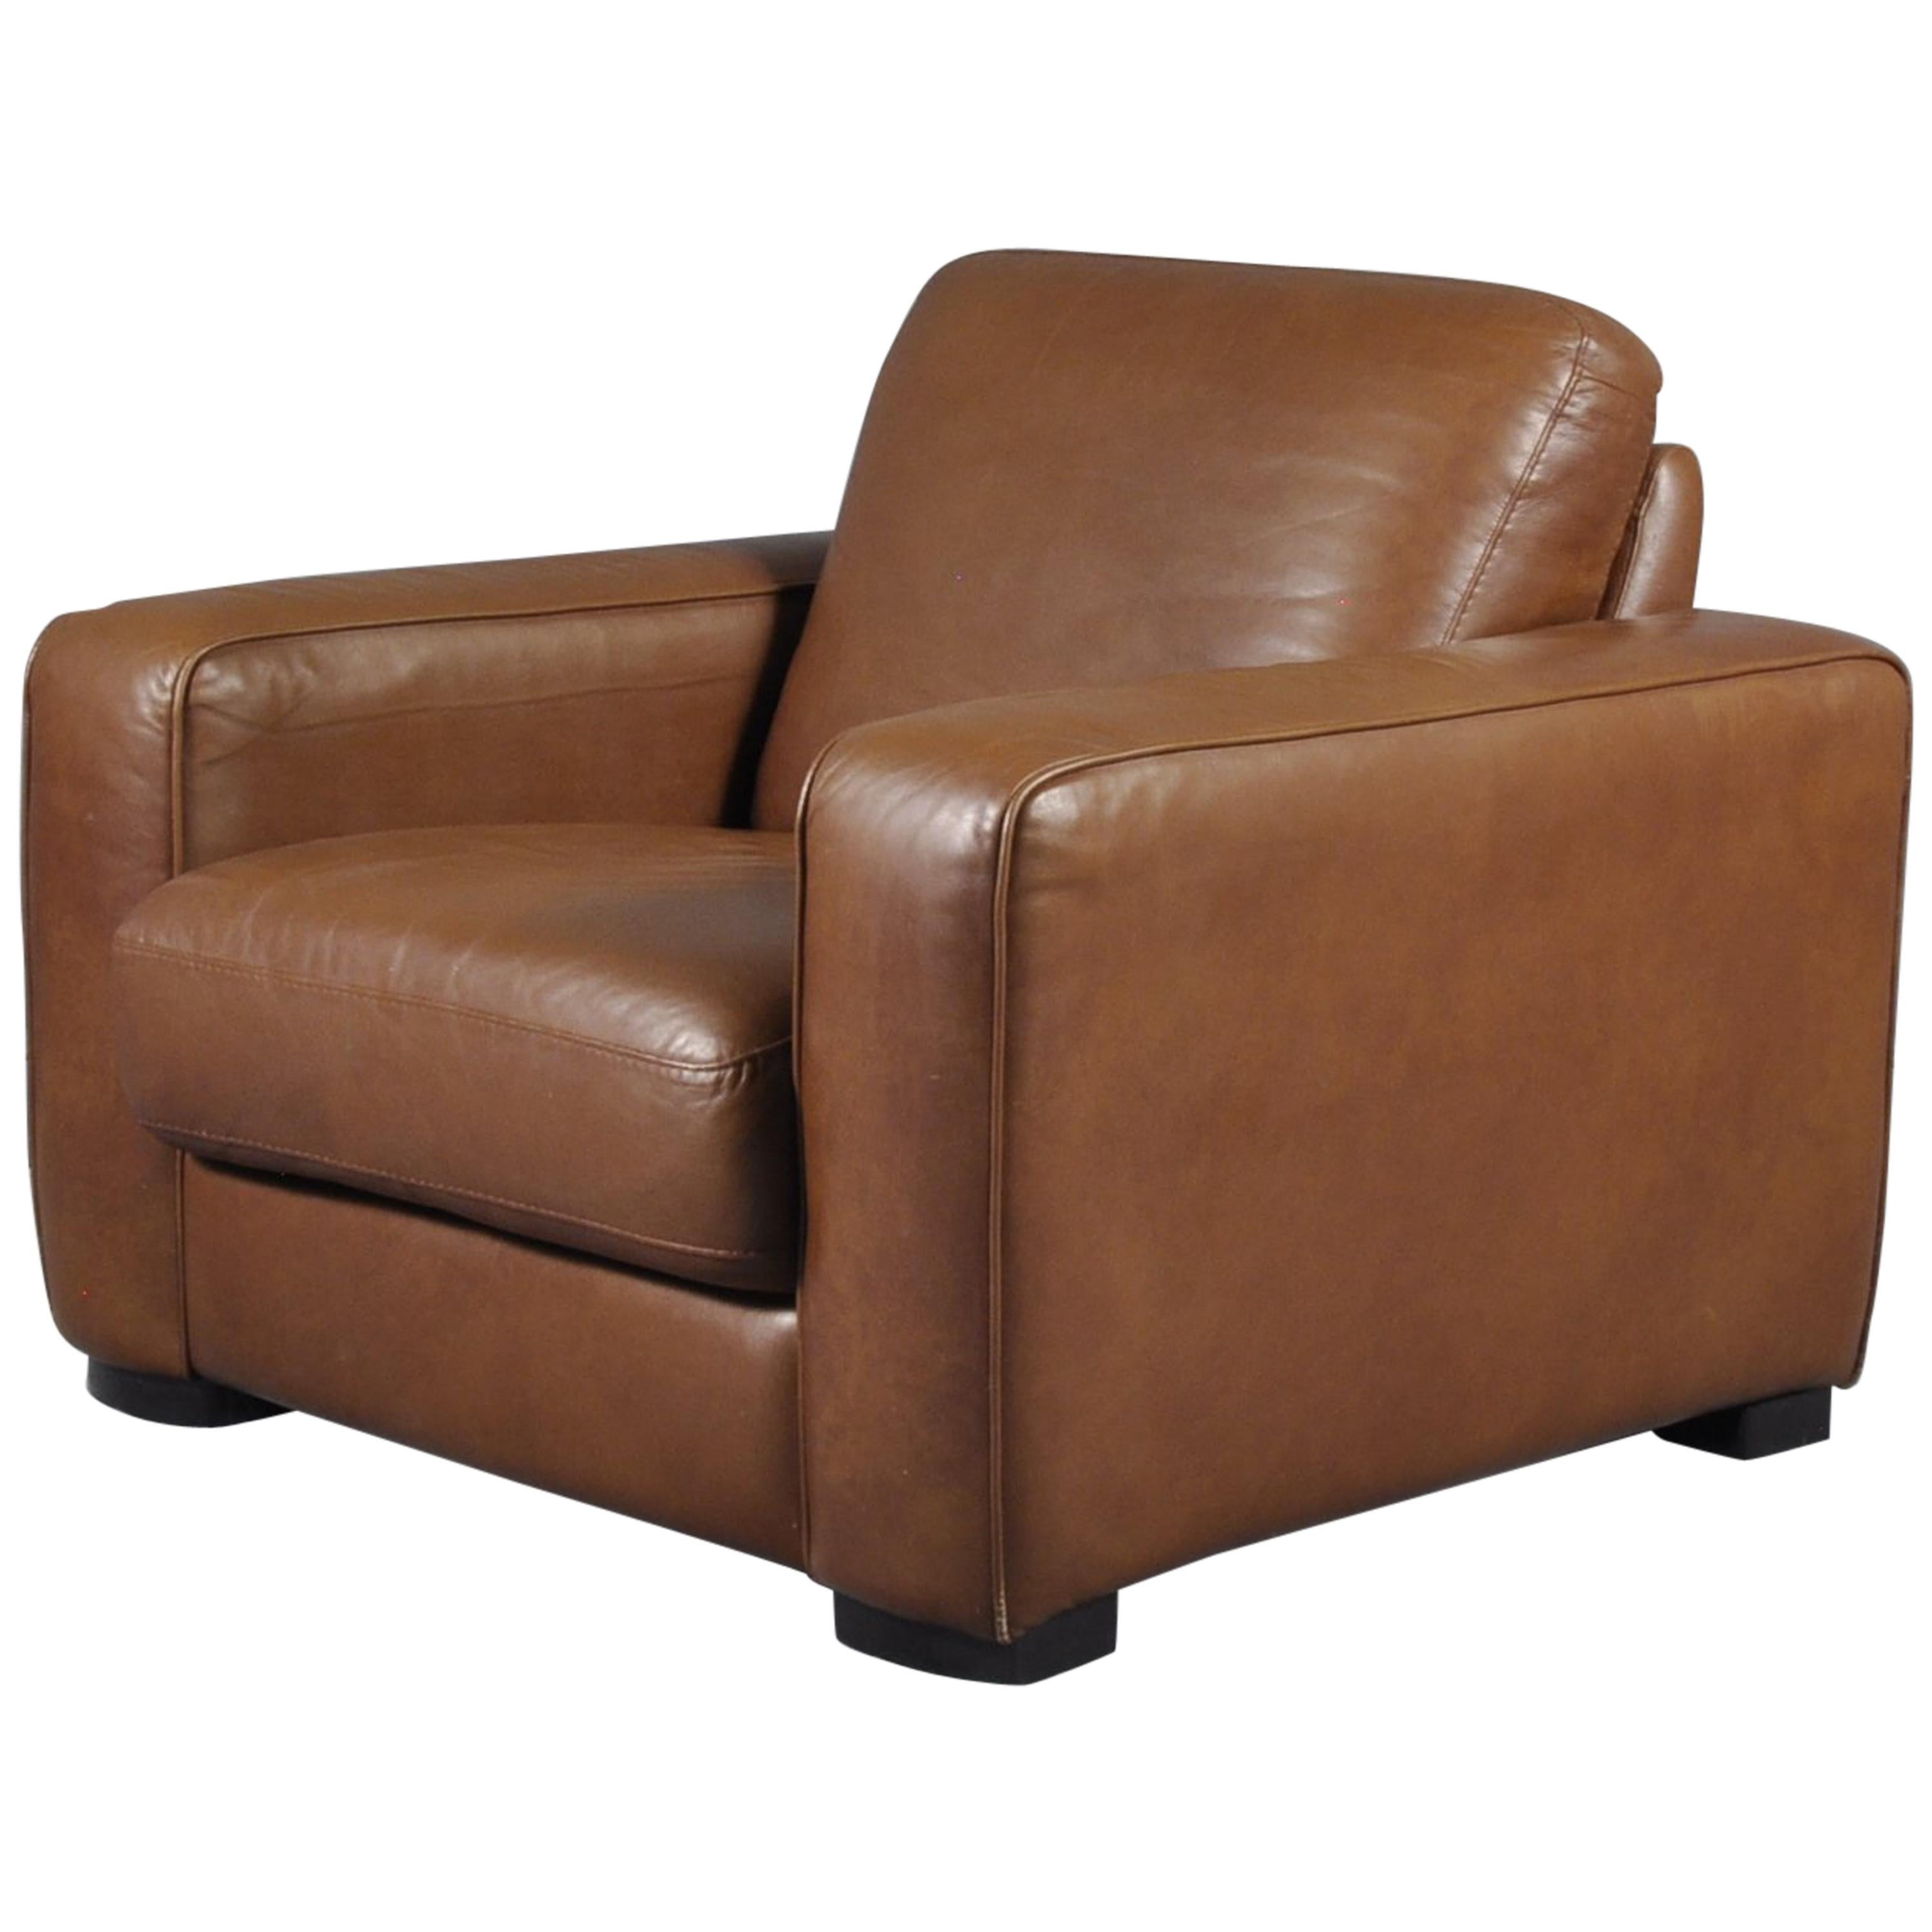 Oversized Cigar Brown High Quality Leather Club Chair For Sale